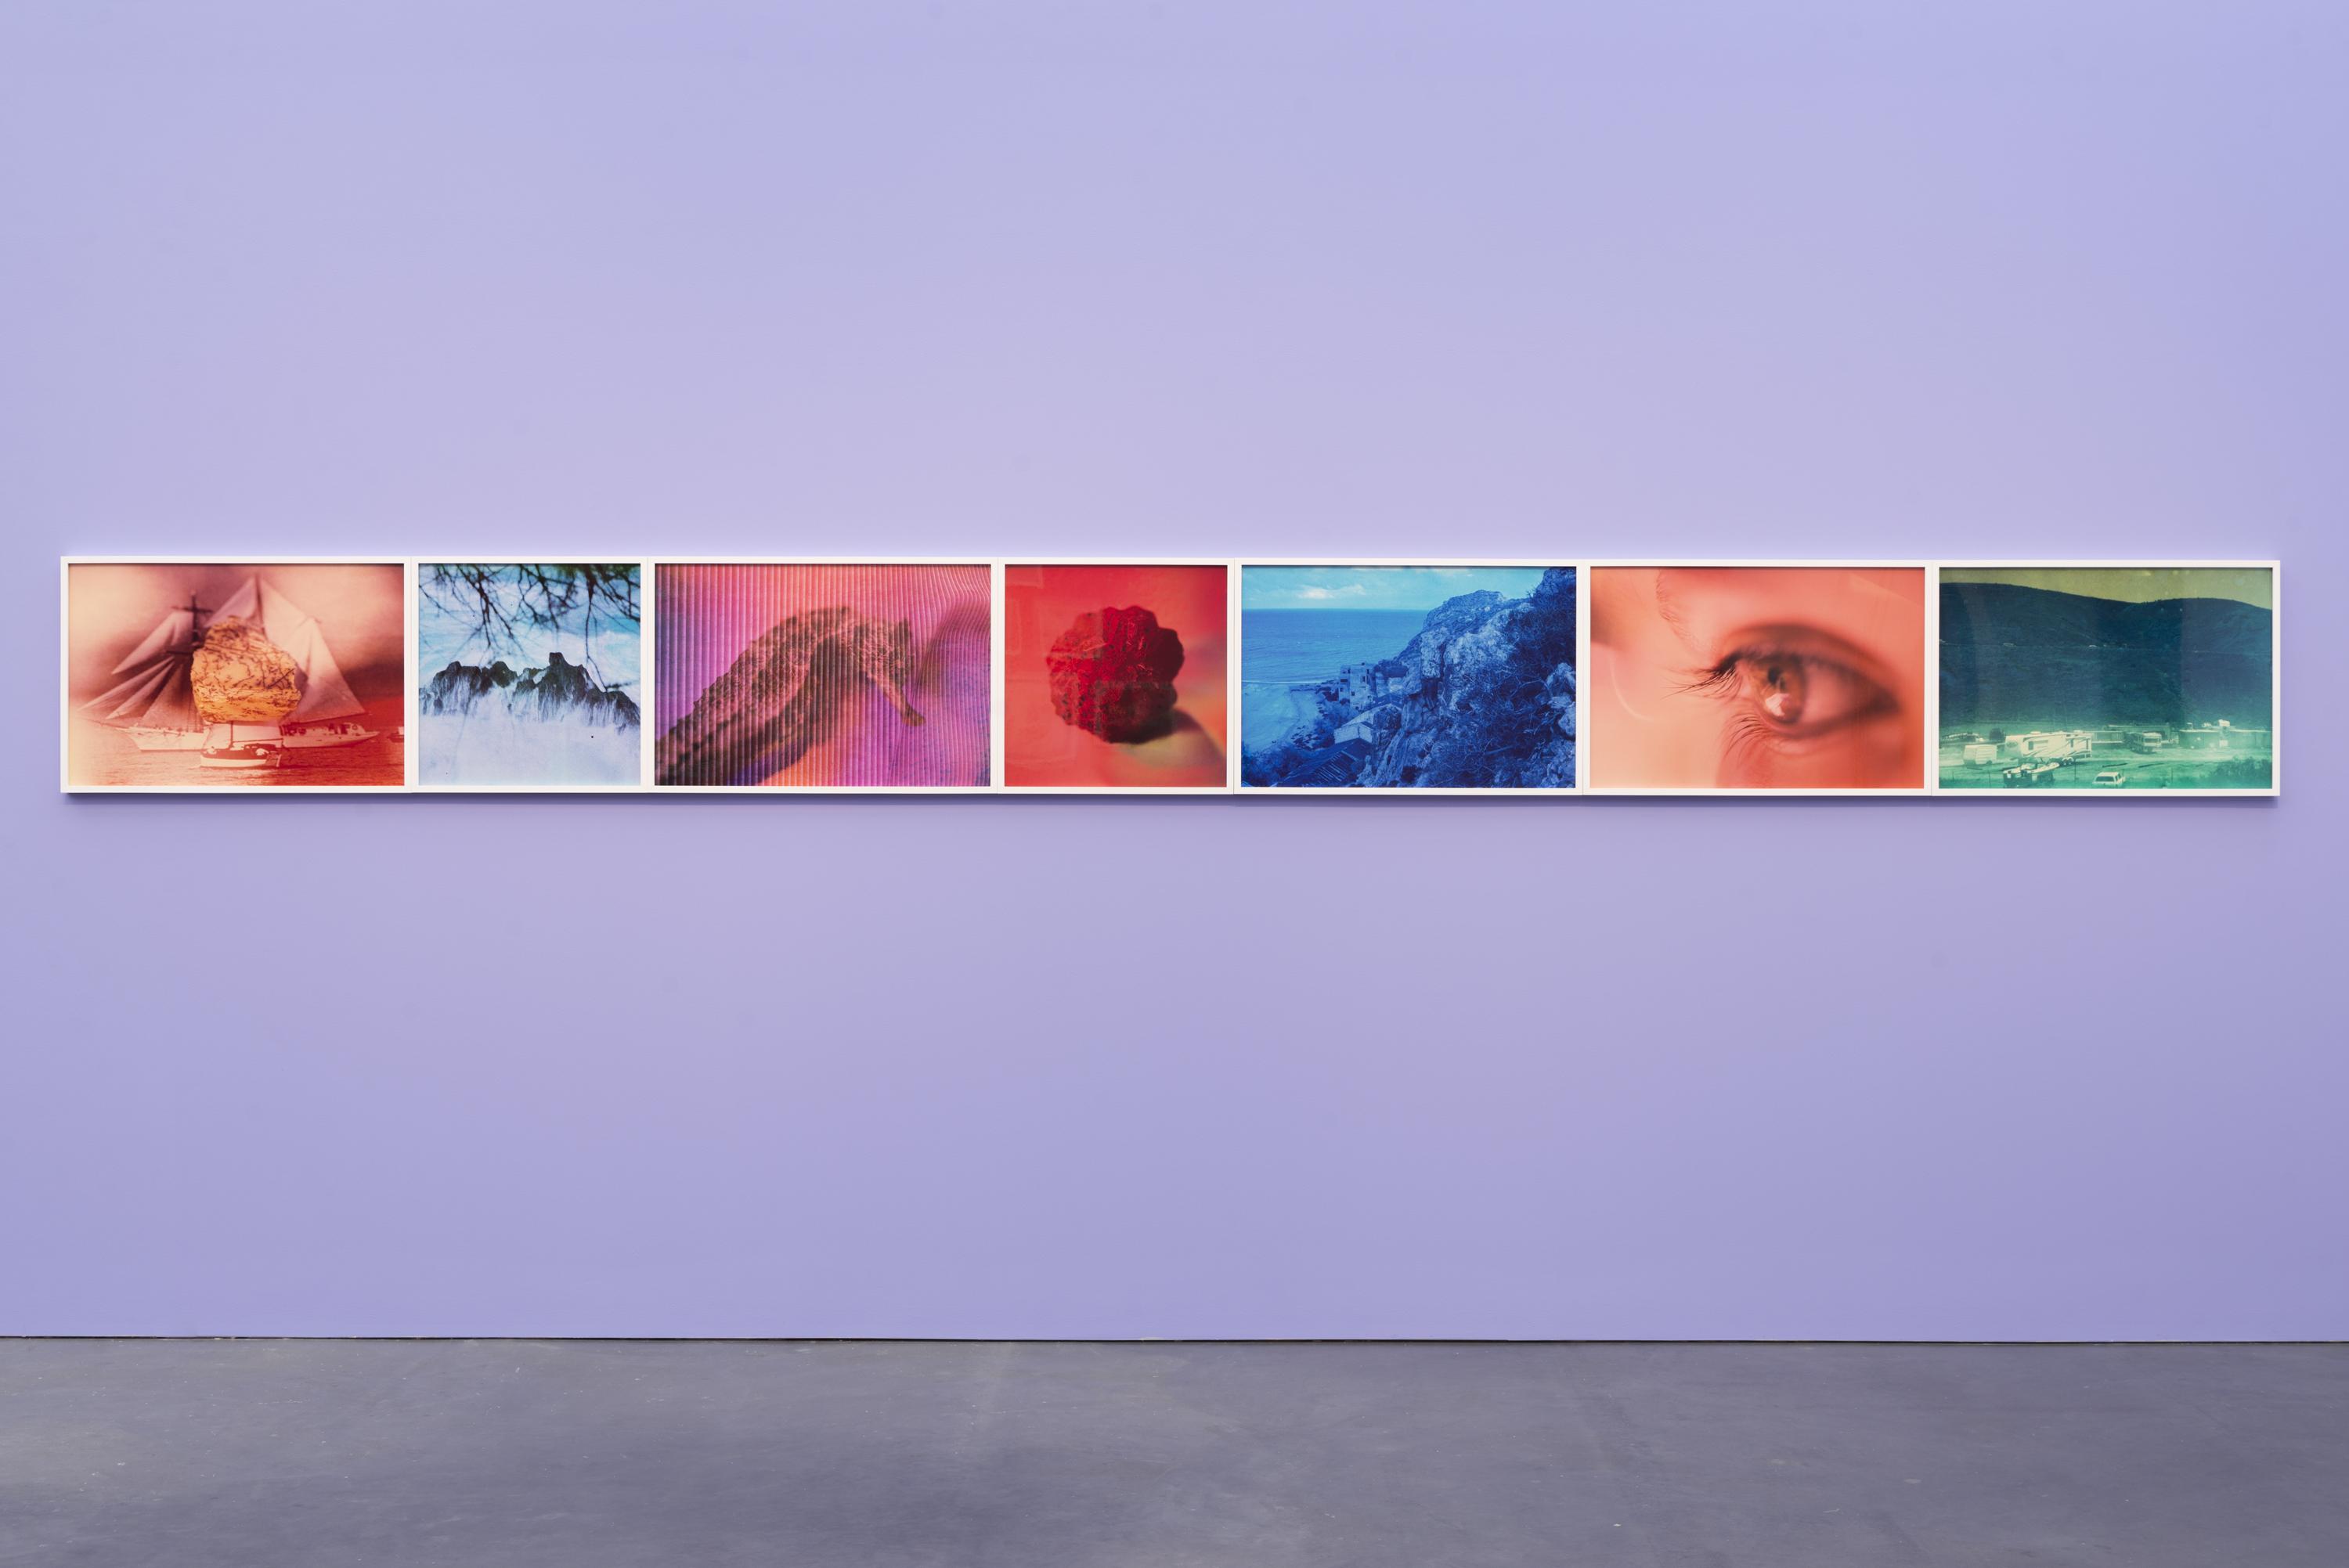 Seven colorful images are displayed adjacent in a row against a purple wall. Each image depicts a different subject.